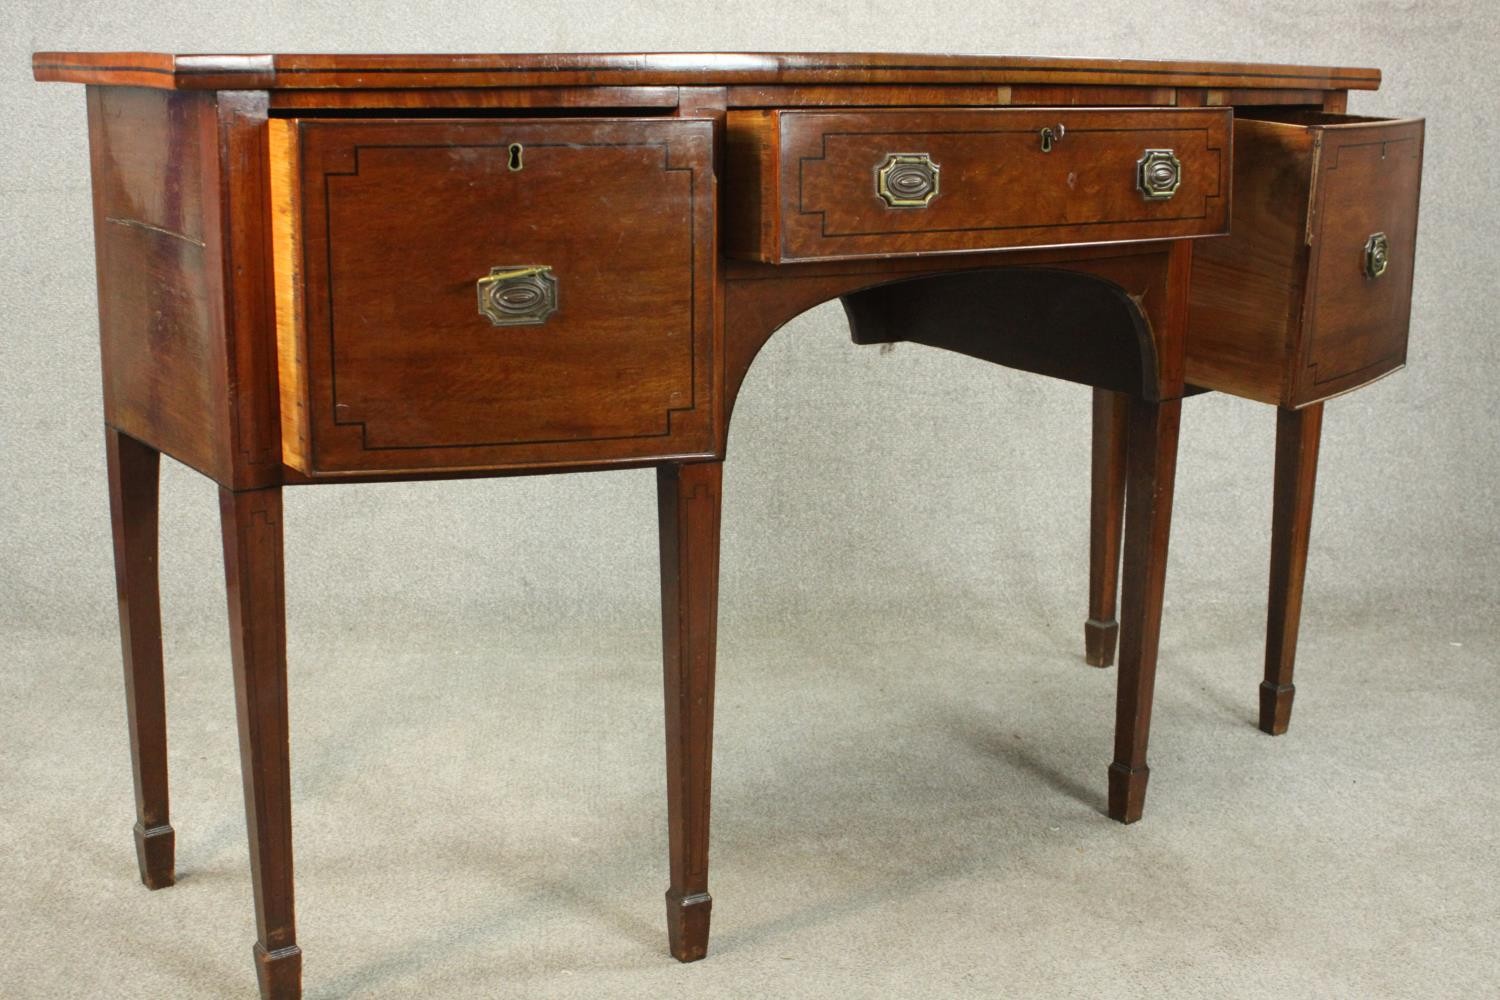 A Regency mahogany bow front sideboard, with a central drawer flanked by two deep drawers on - Image 10 of 13